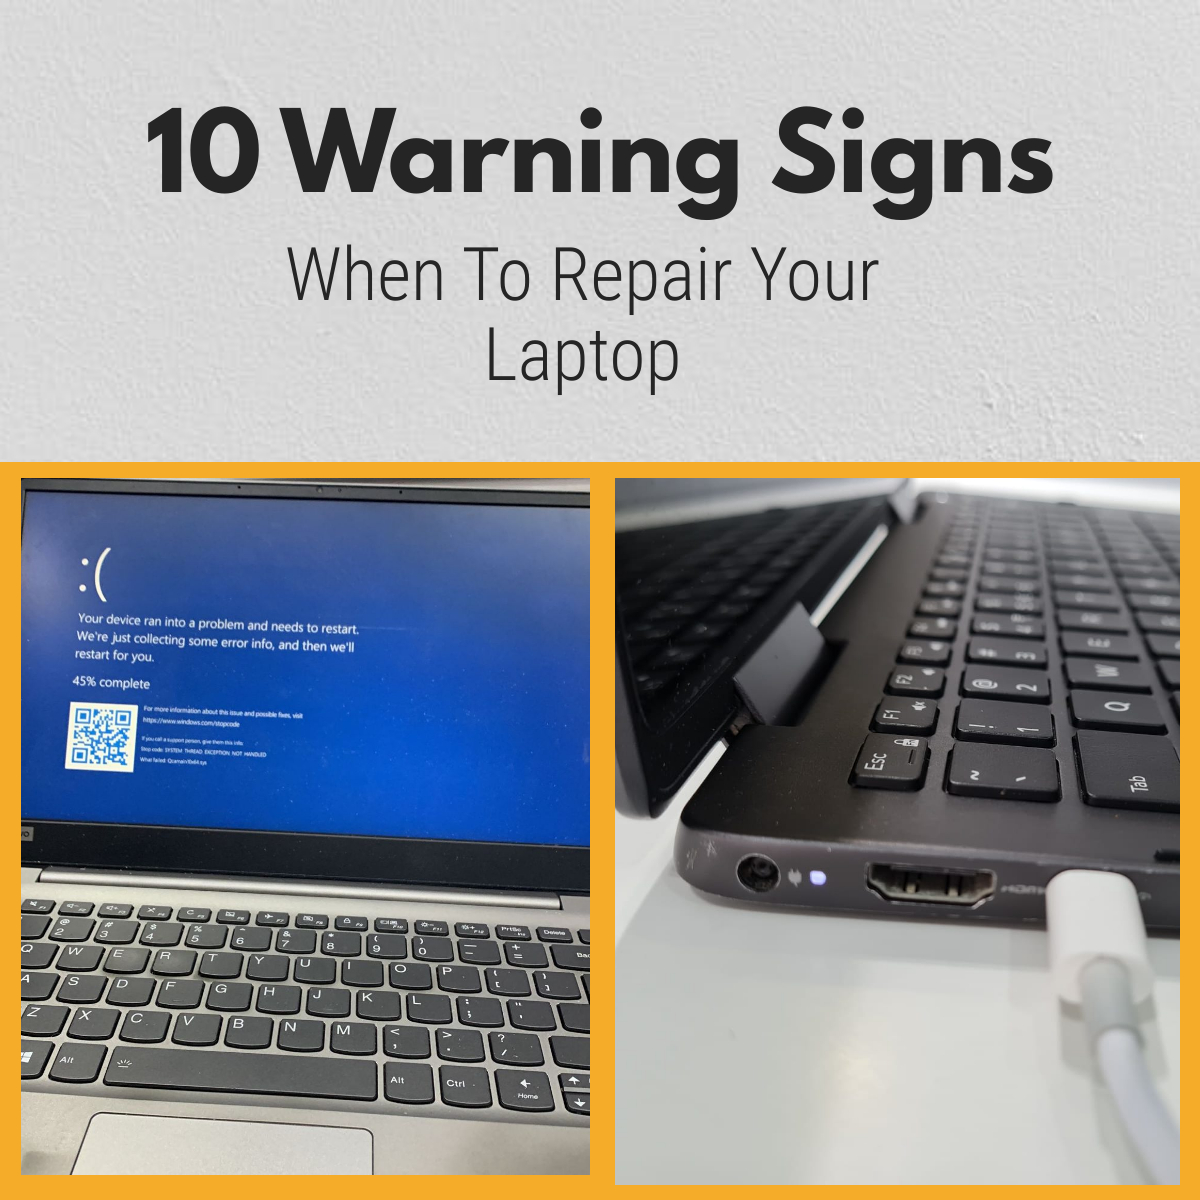 nevø Undtagelse liste 10 Warning Signs Show When To Repair Your Laptop - Notebookrepair.sg